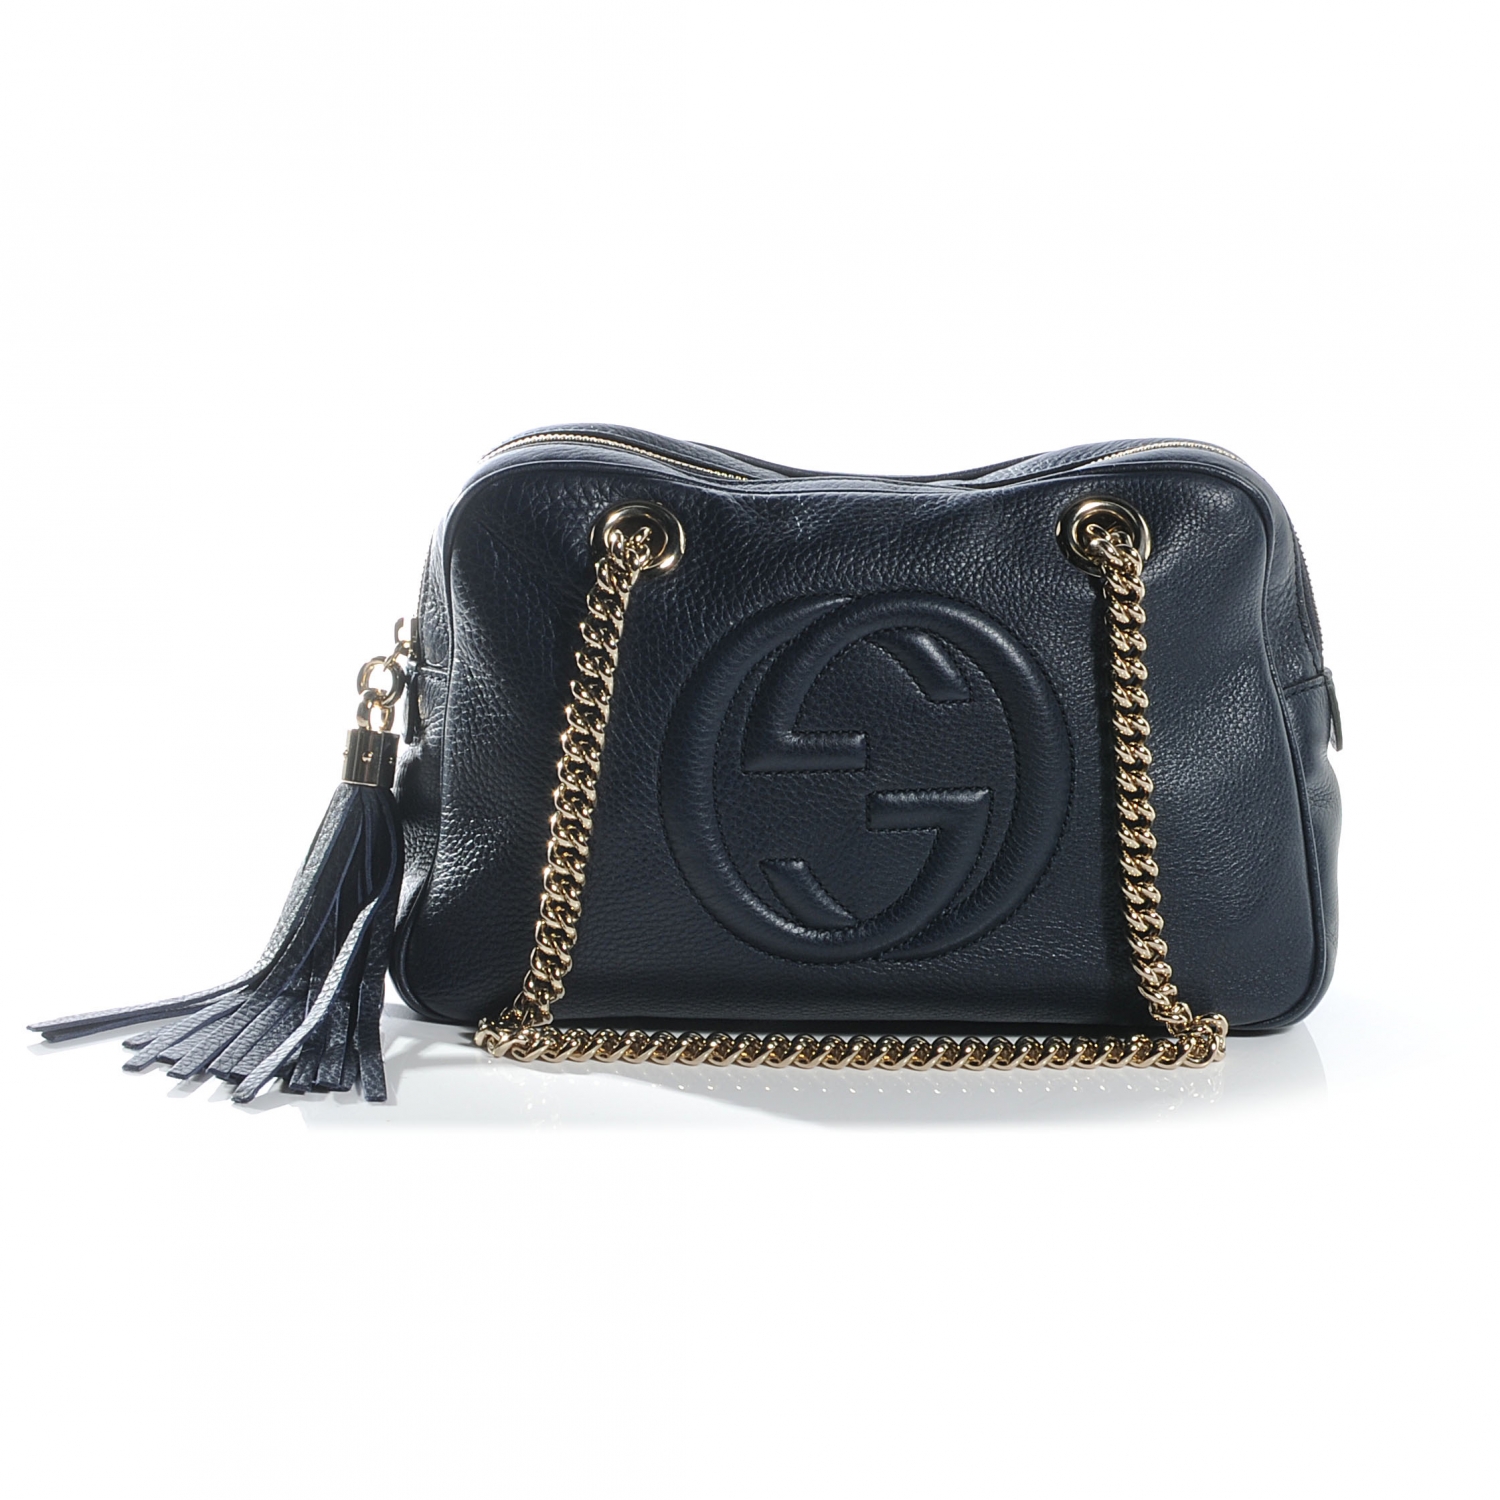 GUCCI Leather Small Soho Shoulder Bag Navy 53698